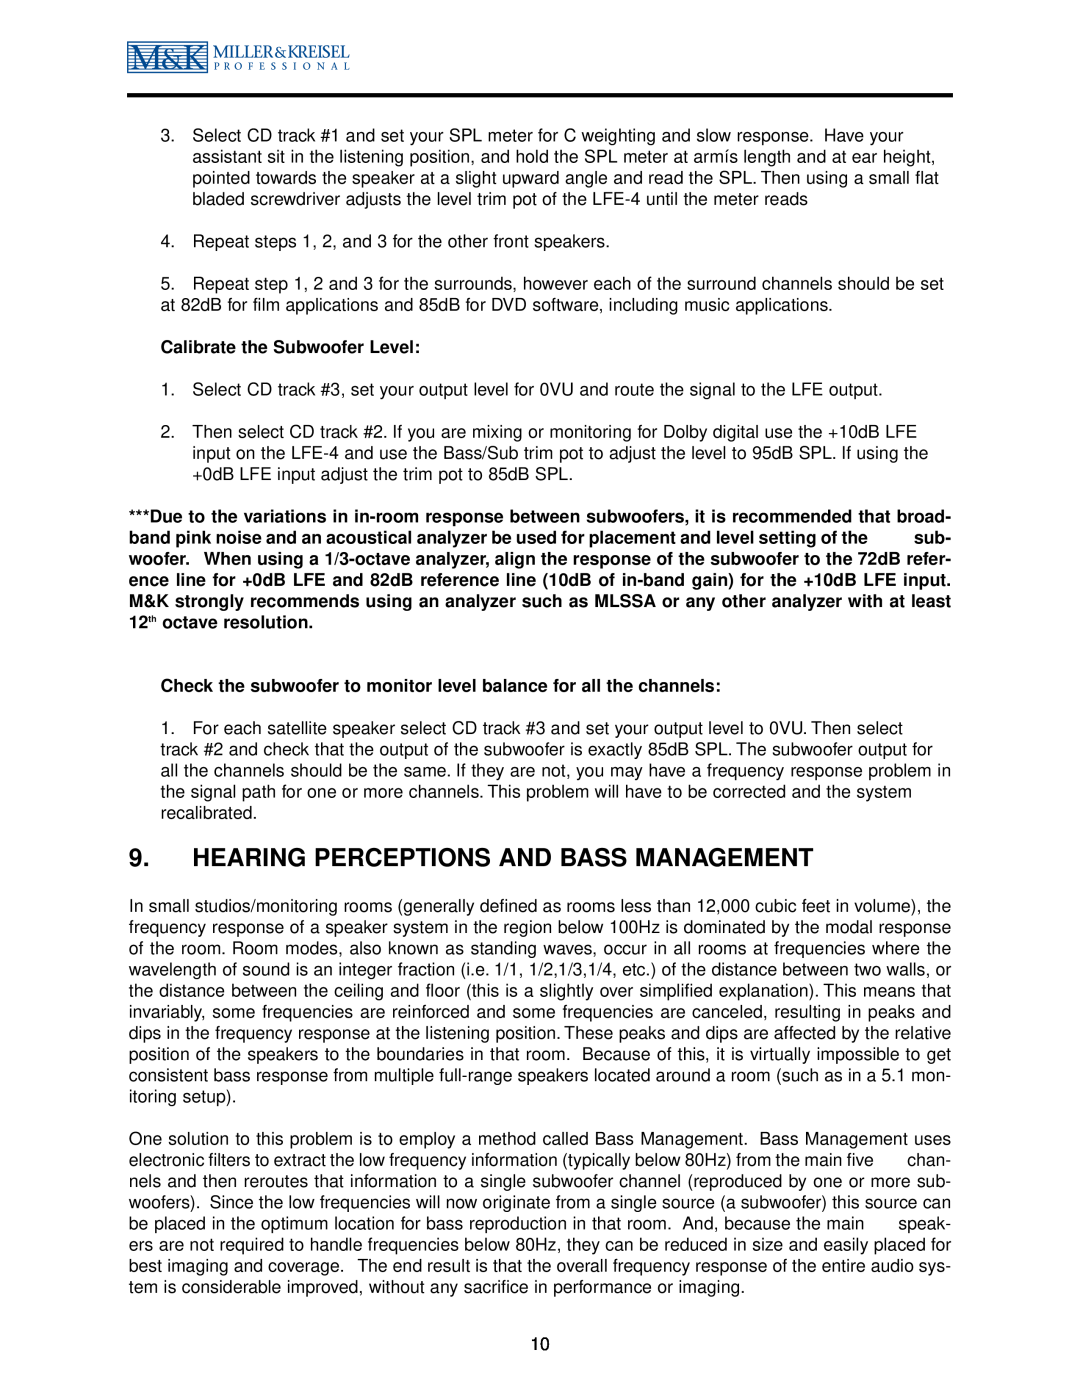 MK Sound MPS-5310, MPS-5410 operation manual Hearing Perceptions And Bass Management 